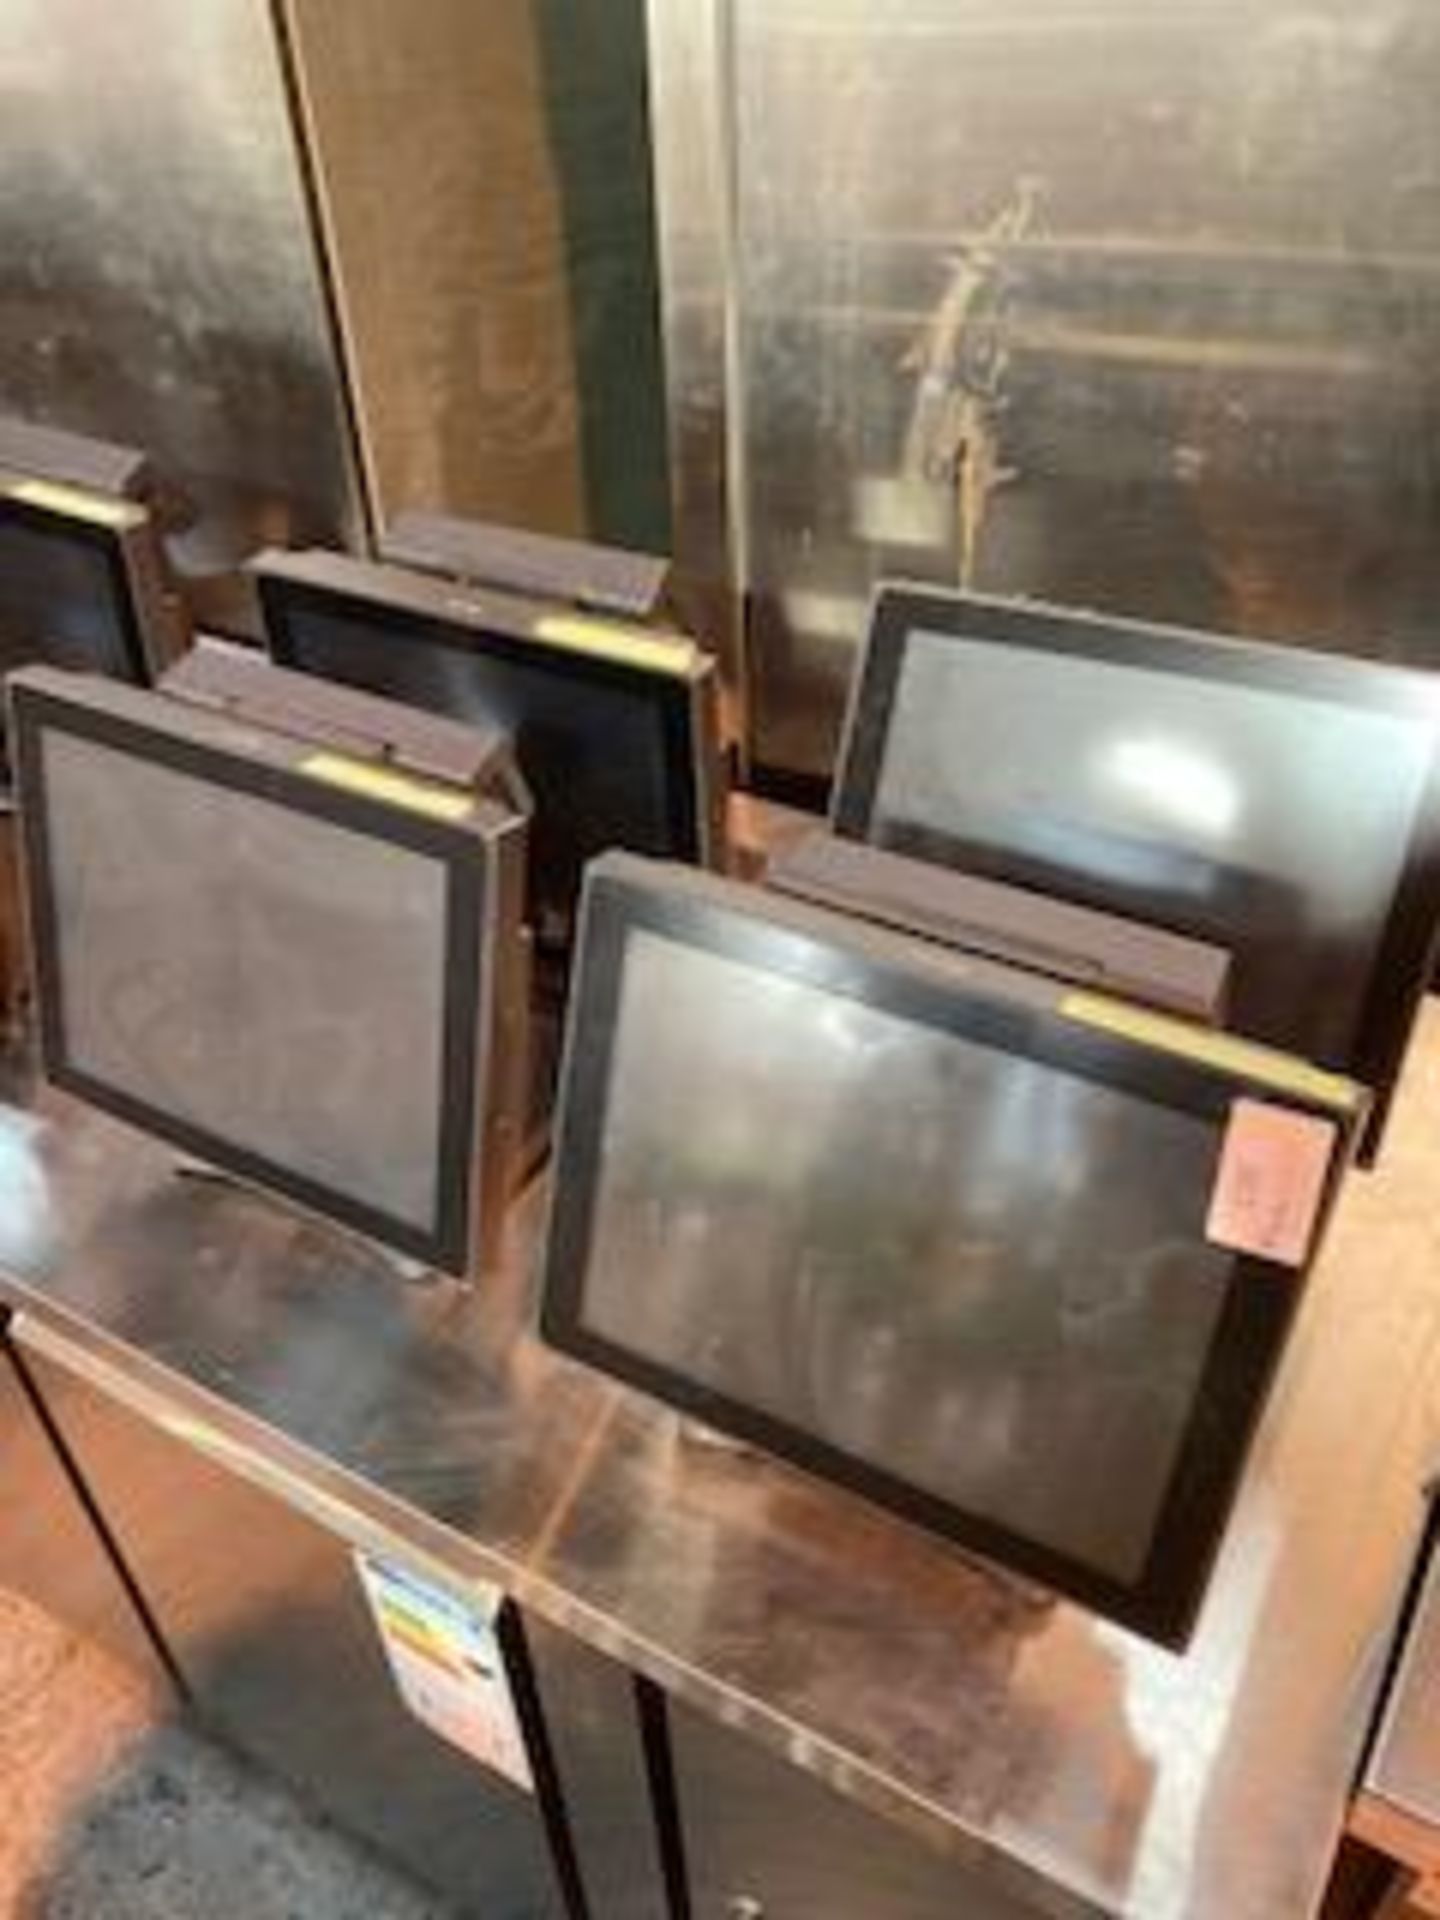 (4) Aures J2 630 Epos Touch Screen Till Systems - Image 2 of 3